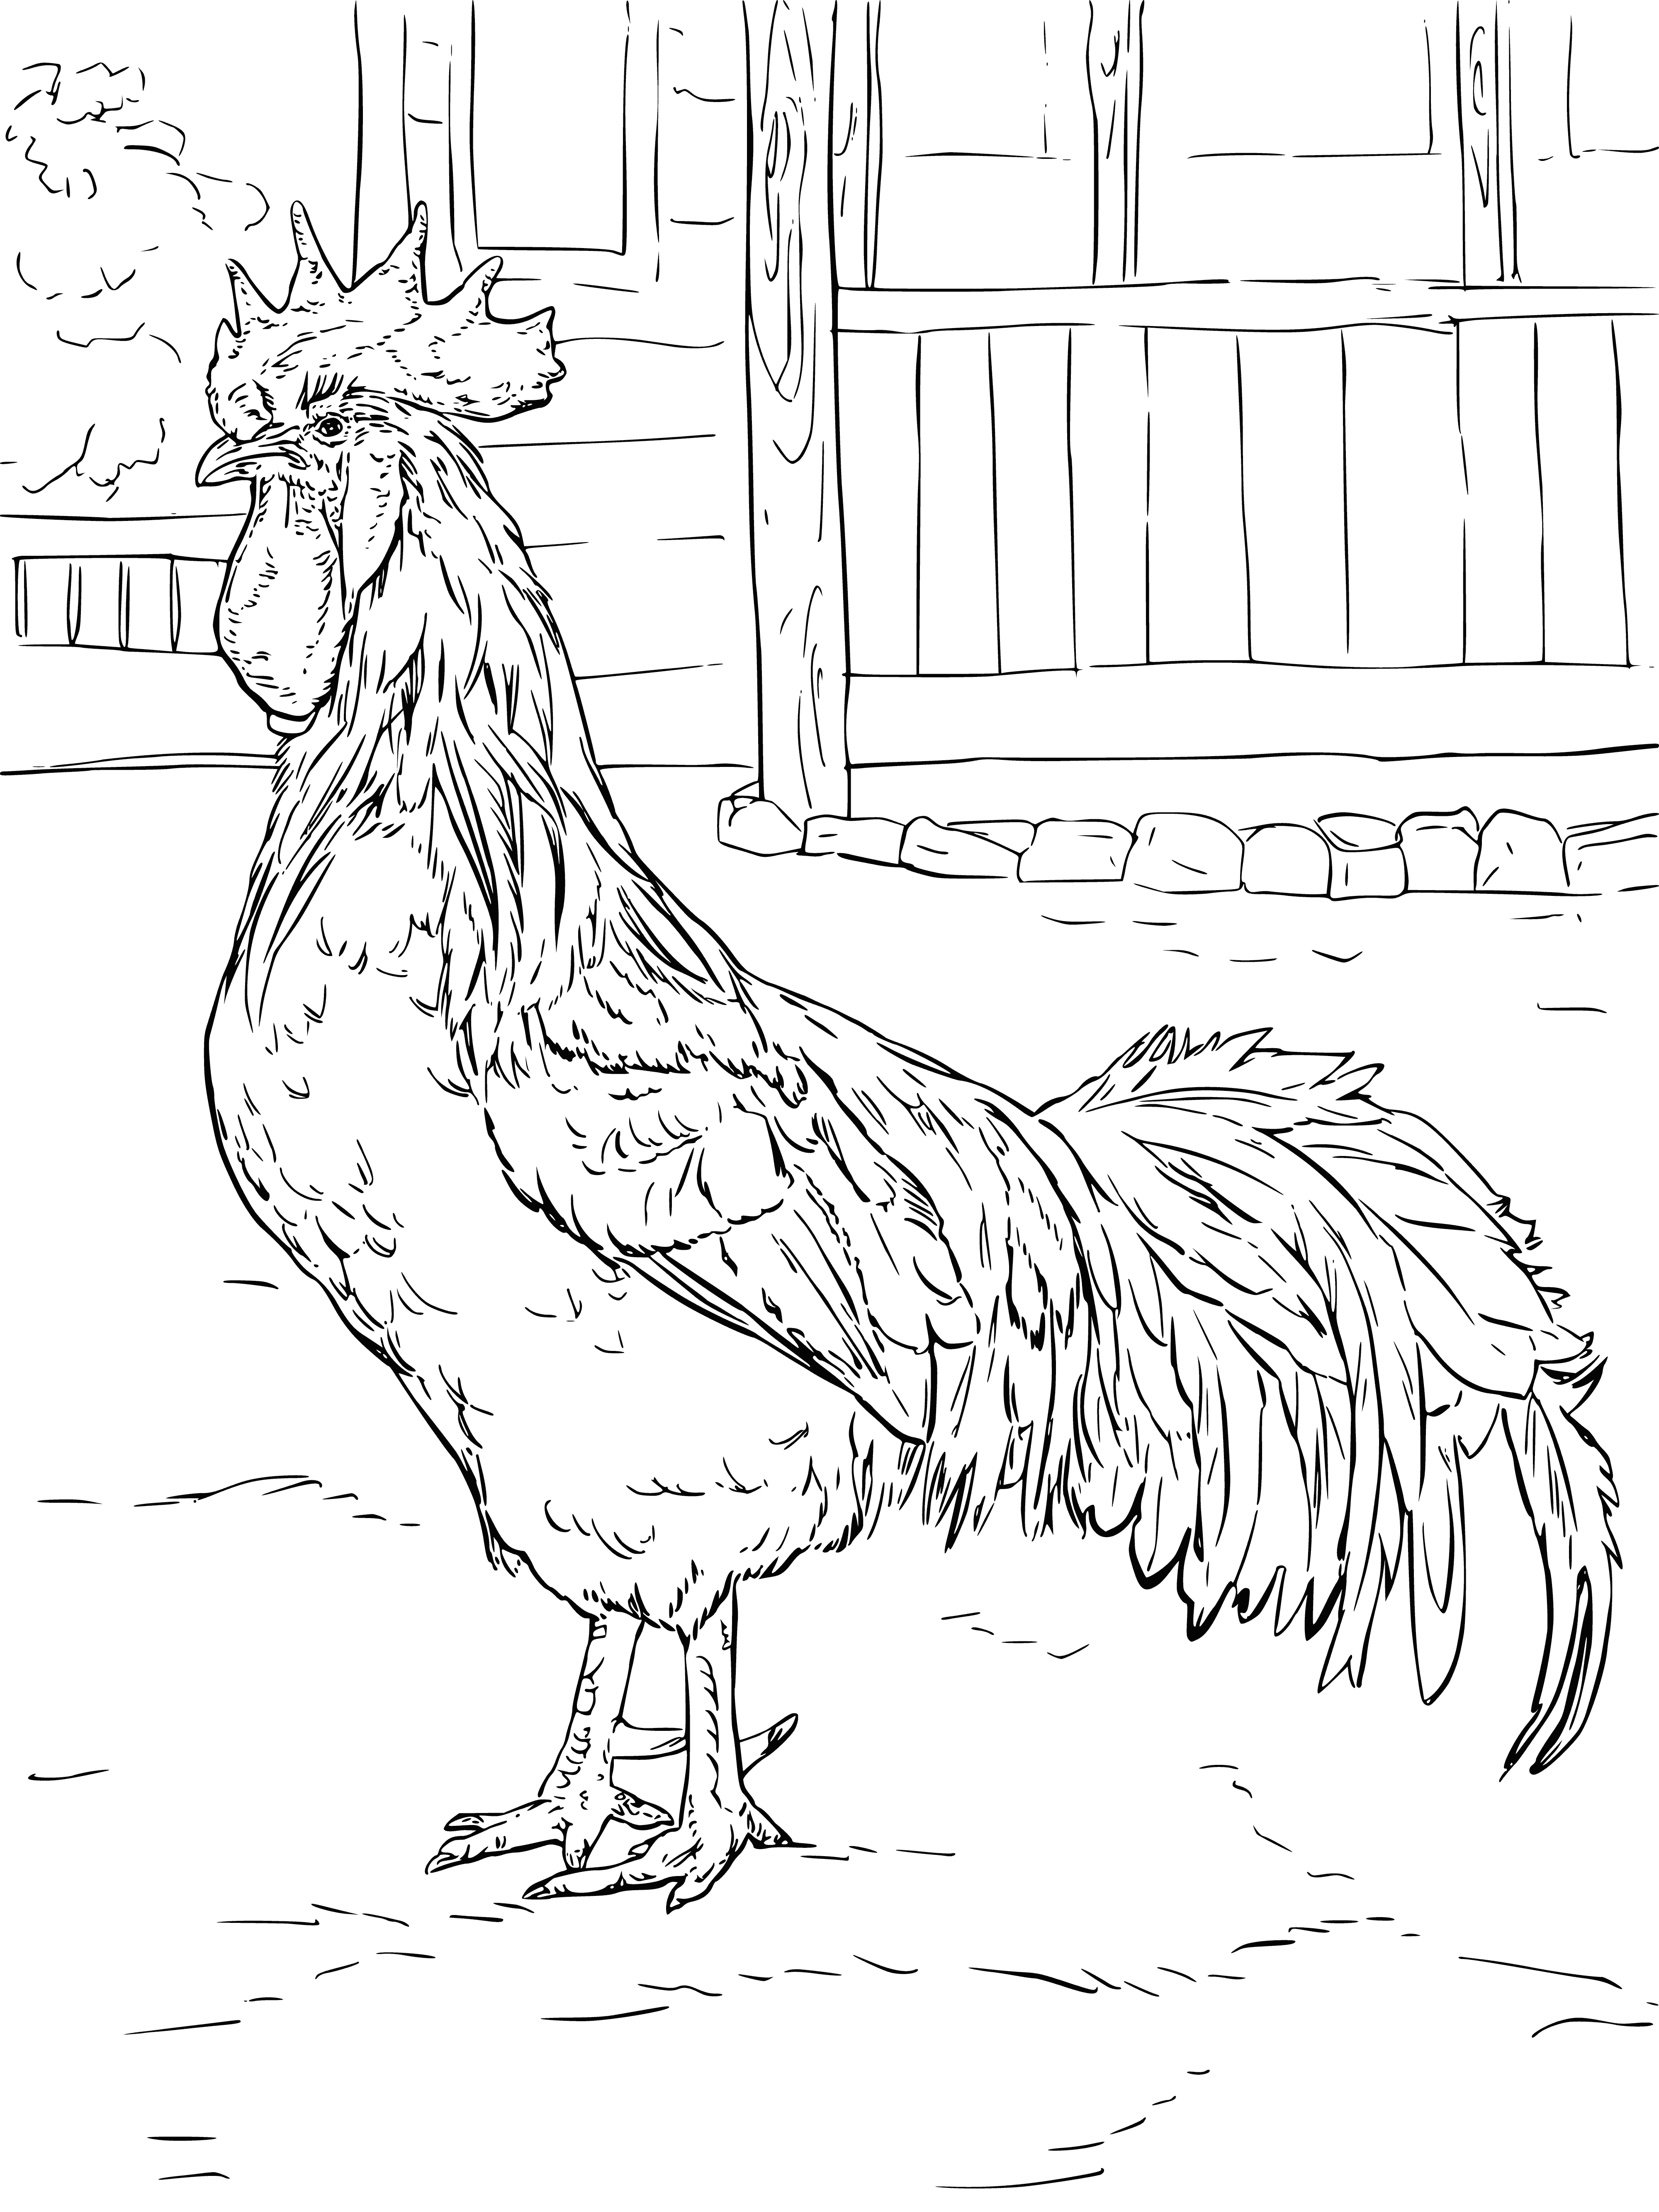 coloring page: a beautiful bird stands in the yard; red tail and crest, black head, wings with white tips - a magnificent sight! #rooster